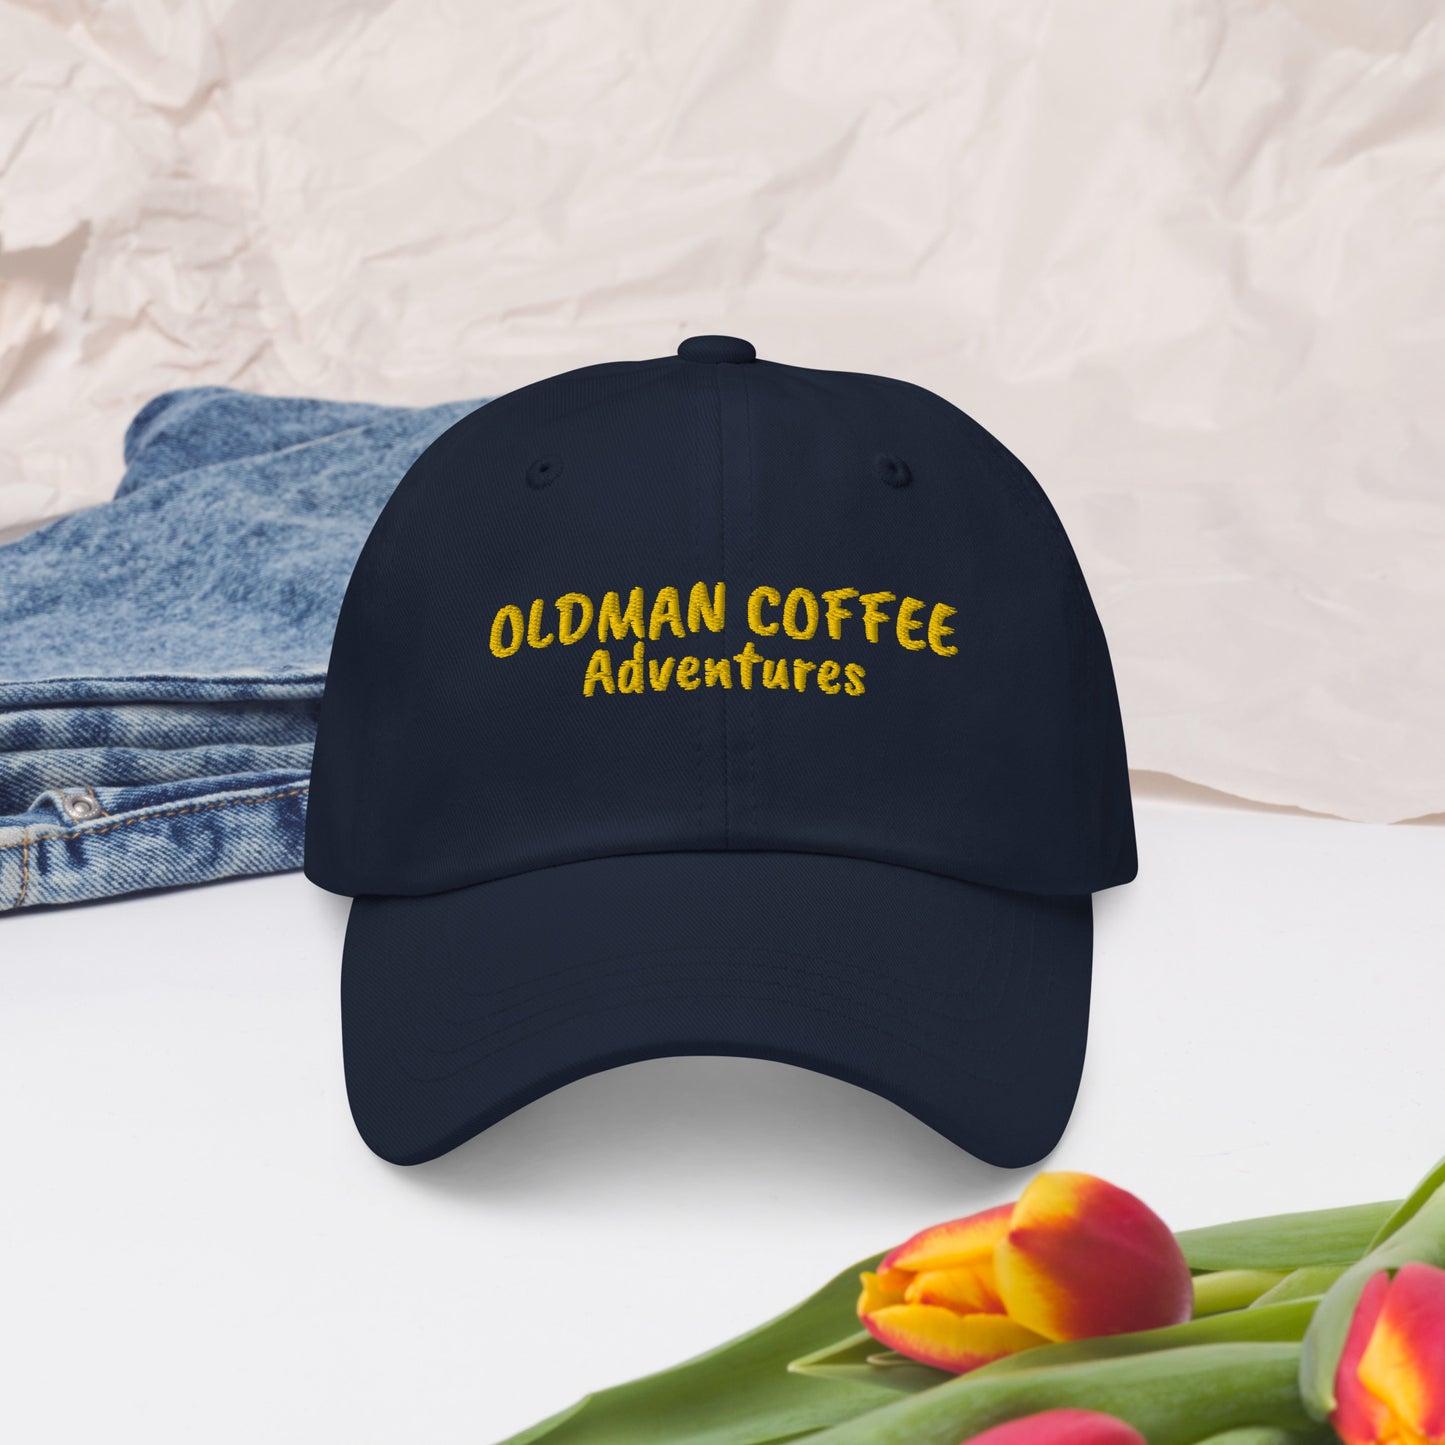 OLDMAN COFFEE Adventures--- FREE SHIPPING IN THE US